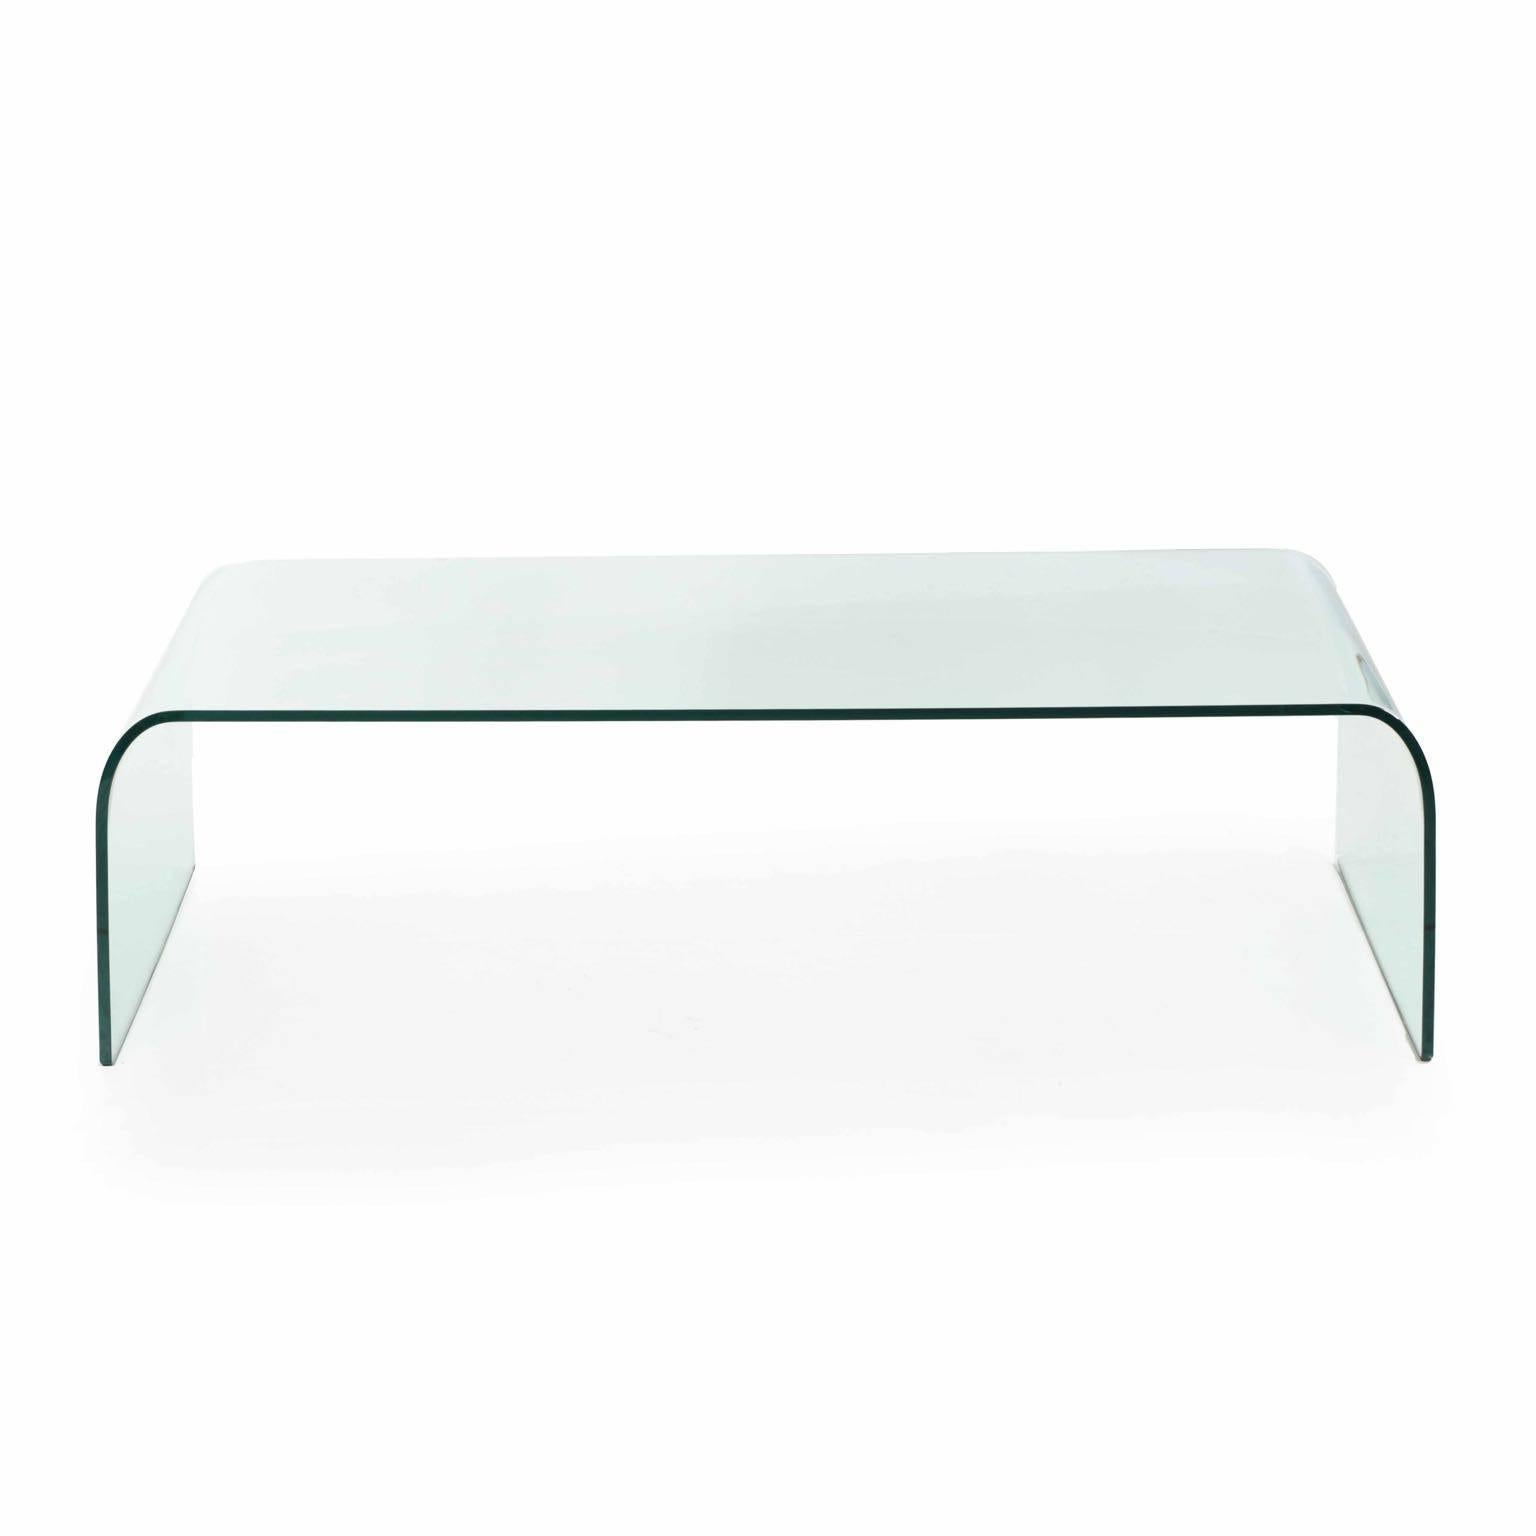 
This high quality tempered glass waterfall table was designed by Angelo Cortesi and manufactured by Fiam Italia along with a large series of other bent glass tables and consoles. The present example retains it’s original frosted label along the